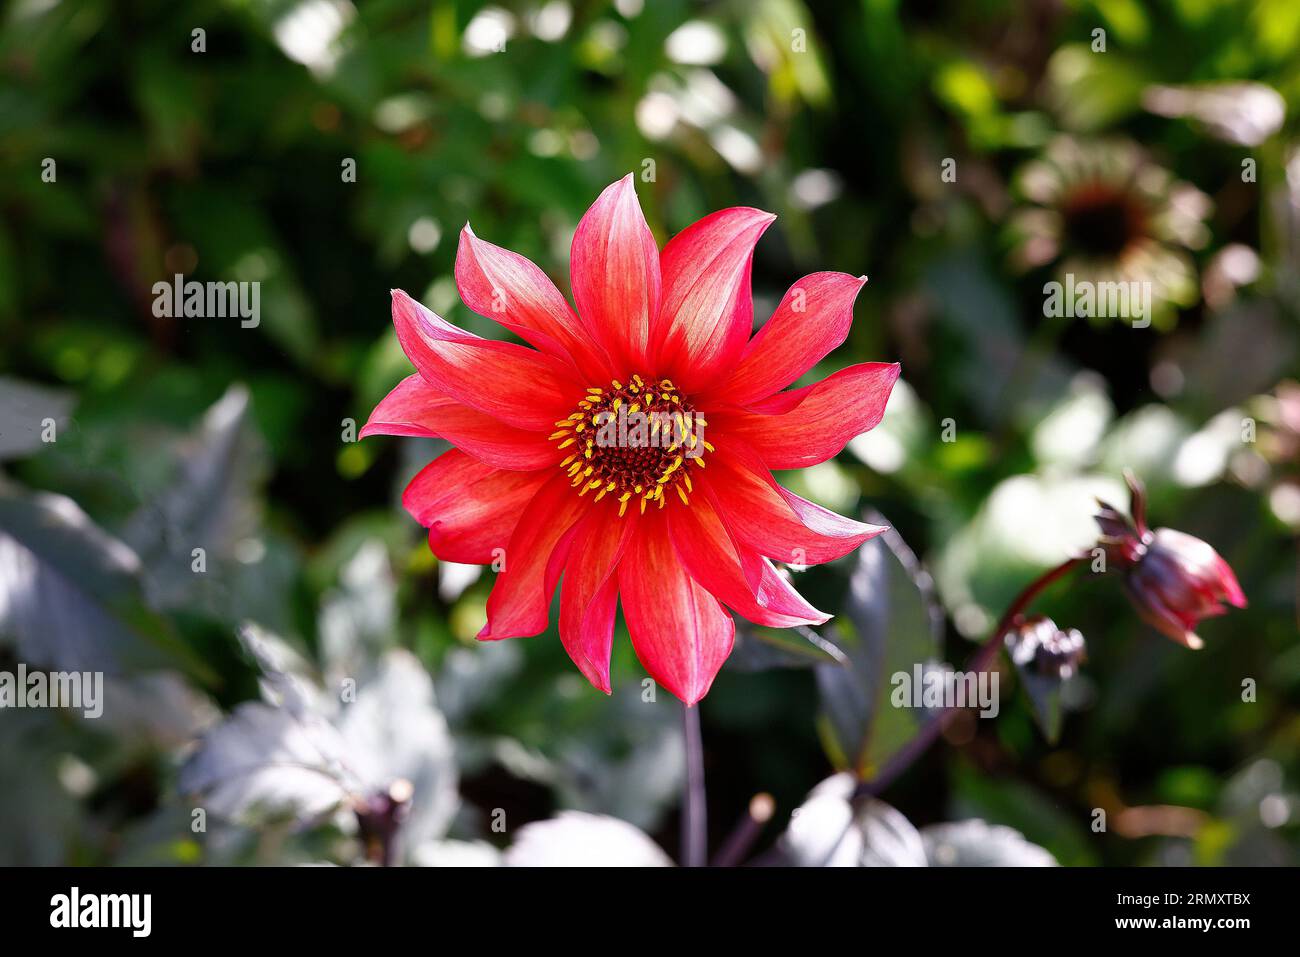 Closeup of the orang coral pink bloom of the tuberous summer to first frost flowering tender garden perennial dahlia waltzing Mathilda. Stock Photo